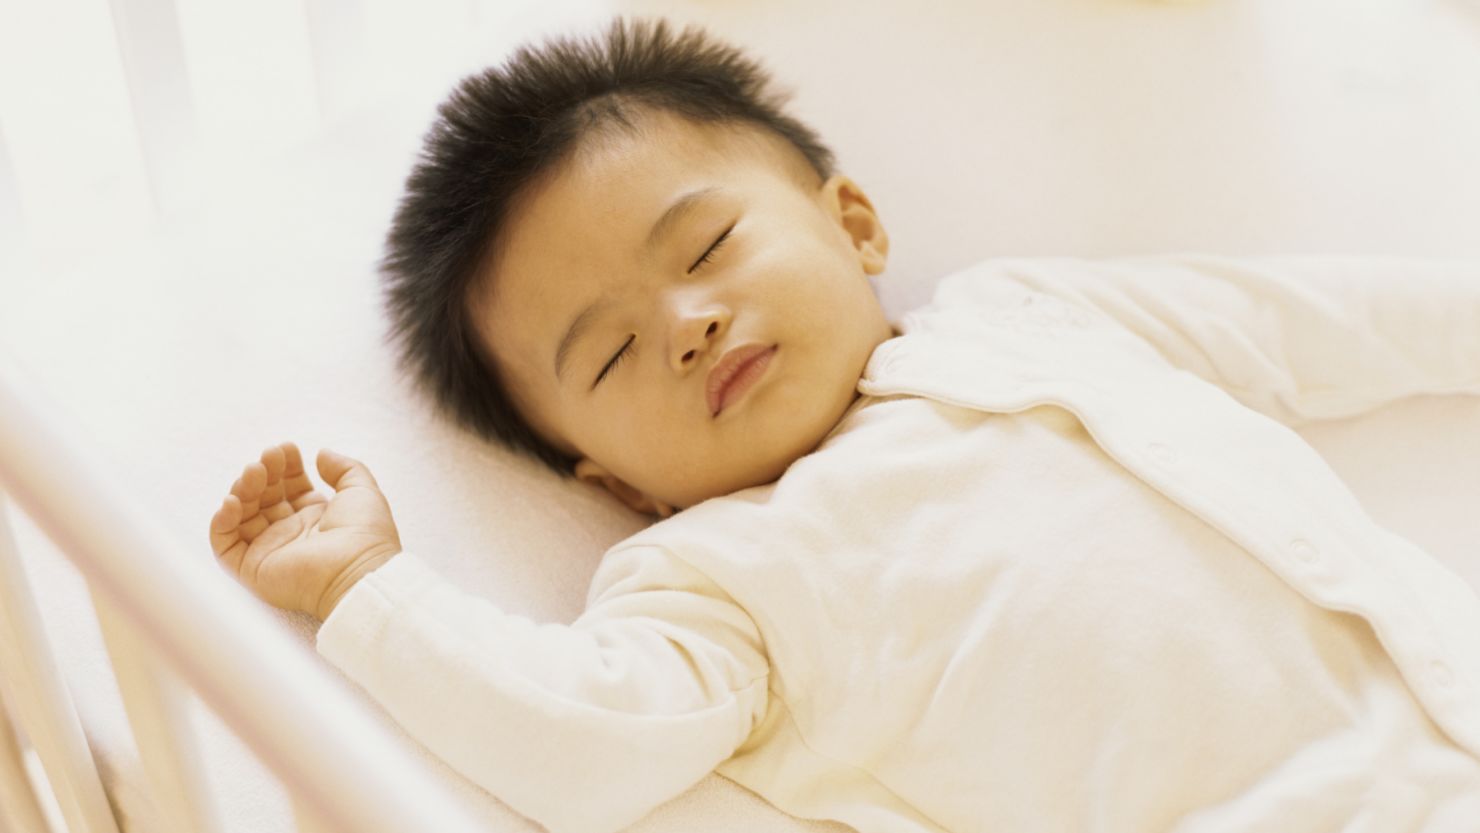 When it comes to babies and the science of sleep, the only certainty is that there is no certainty.